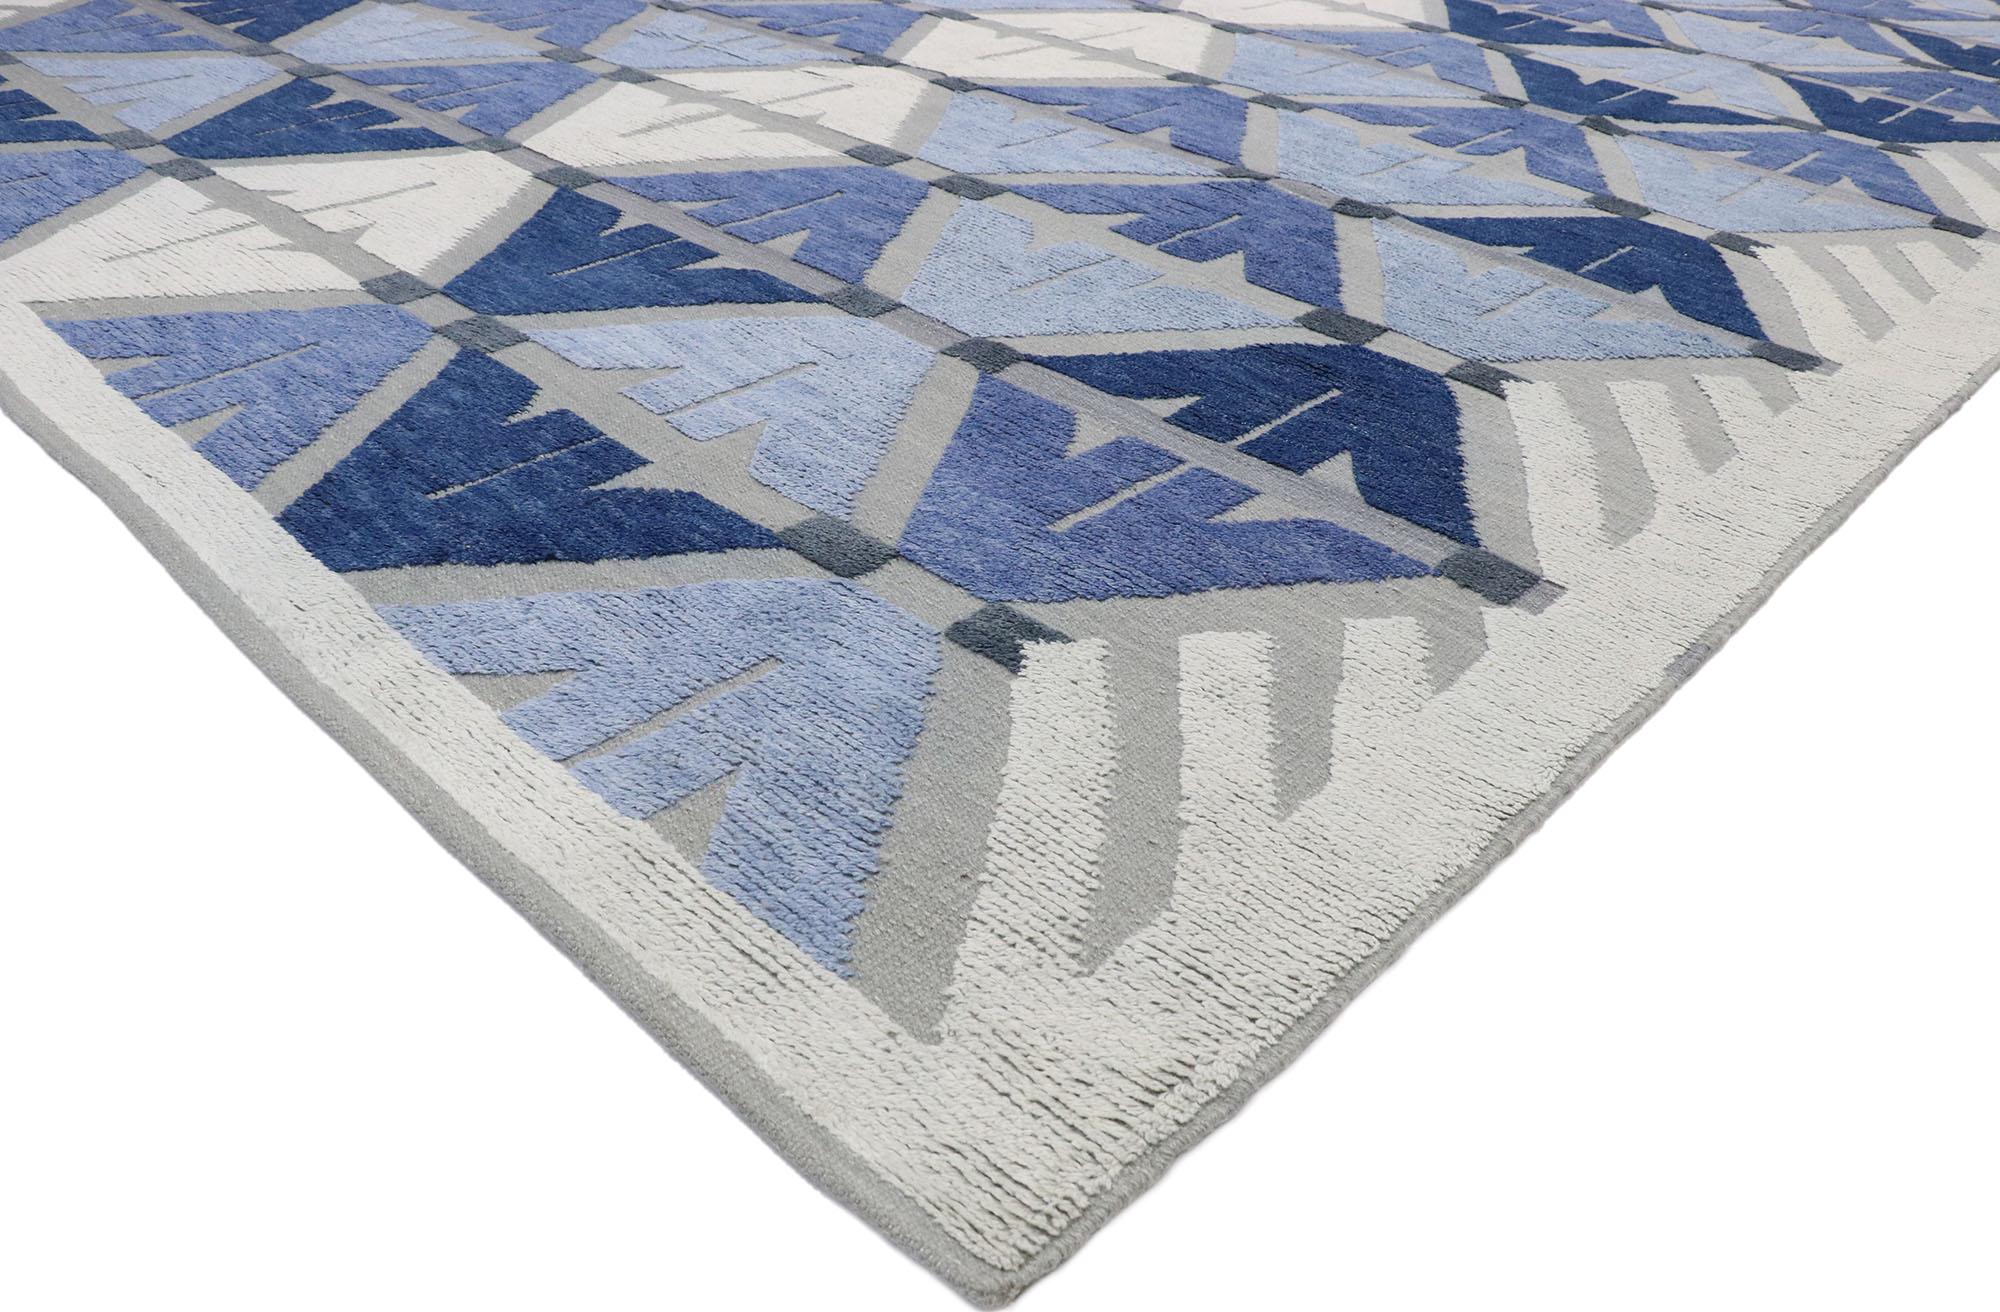 30566 new contemporary Indian Kilim Souf rug with raised design. A dynamic fusion of contemporary trends and modern style casual meets the eye in this geometric rug. It is made with a unique flat-weave Souf technique of handwoven wool with a high